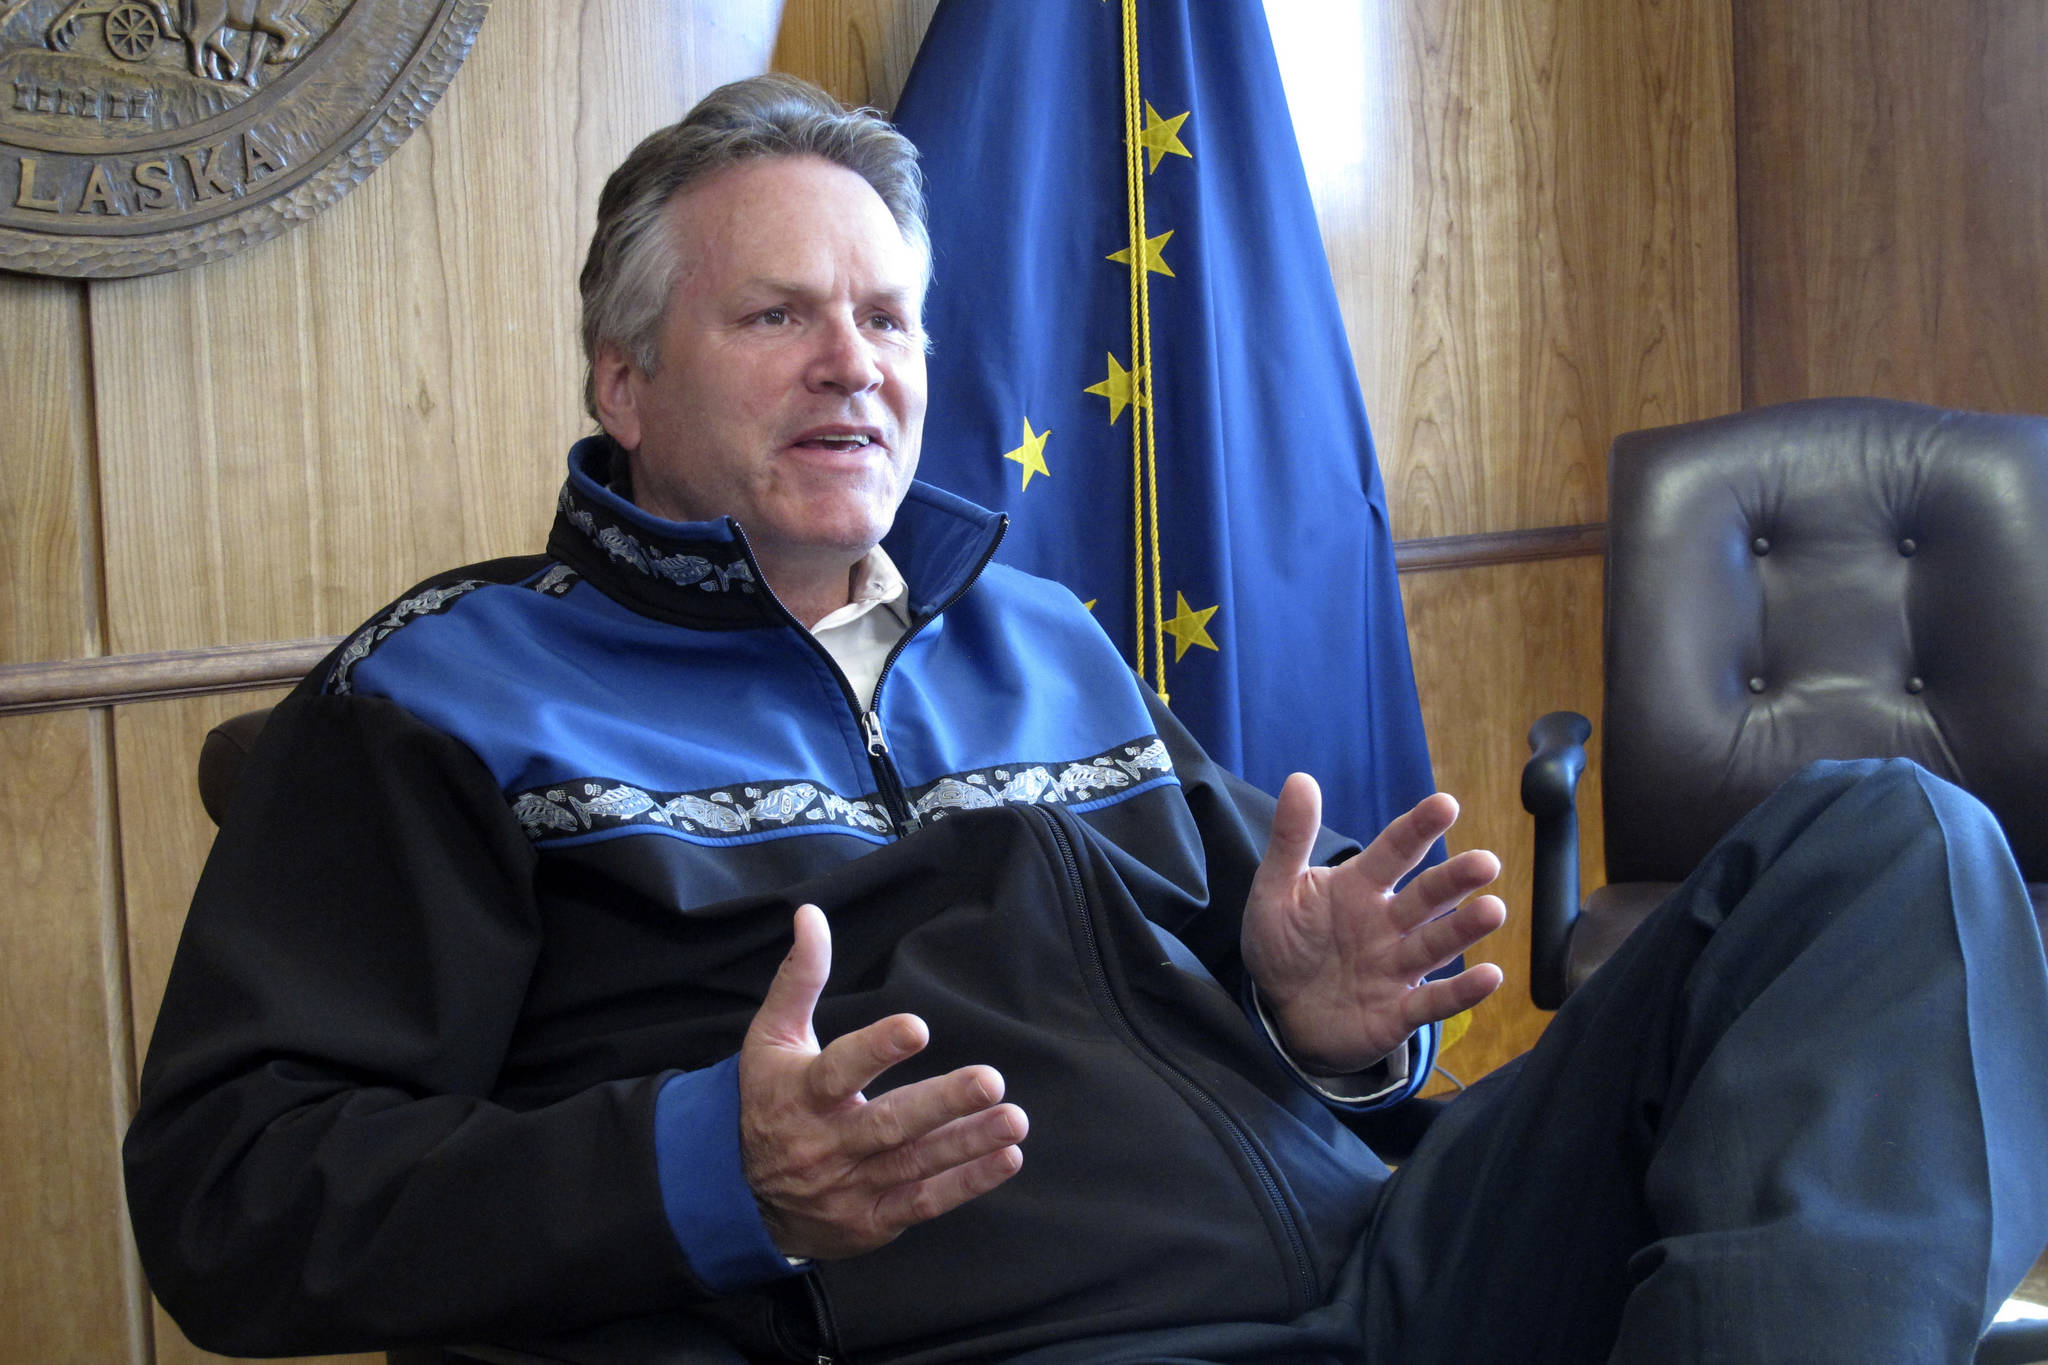 Alaska Gov. Mike Dunleavy gives an interview in the state Capitol on Monday, June 7, 2021, in Juneau, Alaska. The governor urged legislative action on his proposal for the dividend paid to residents from Alaska’s oil-wealth fund. (AP Photo/Becky Bohrer)